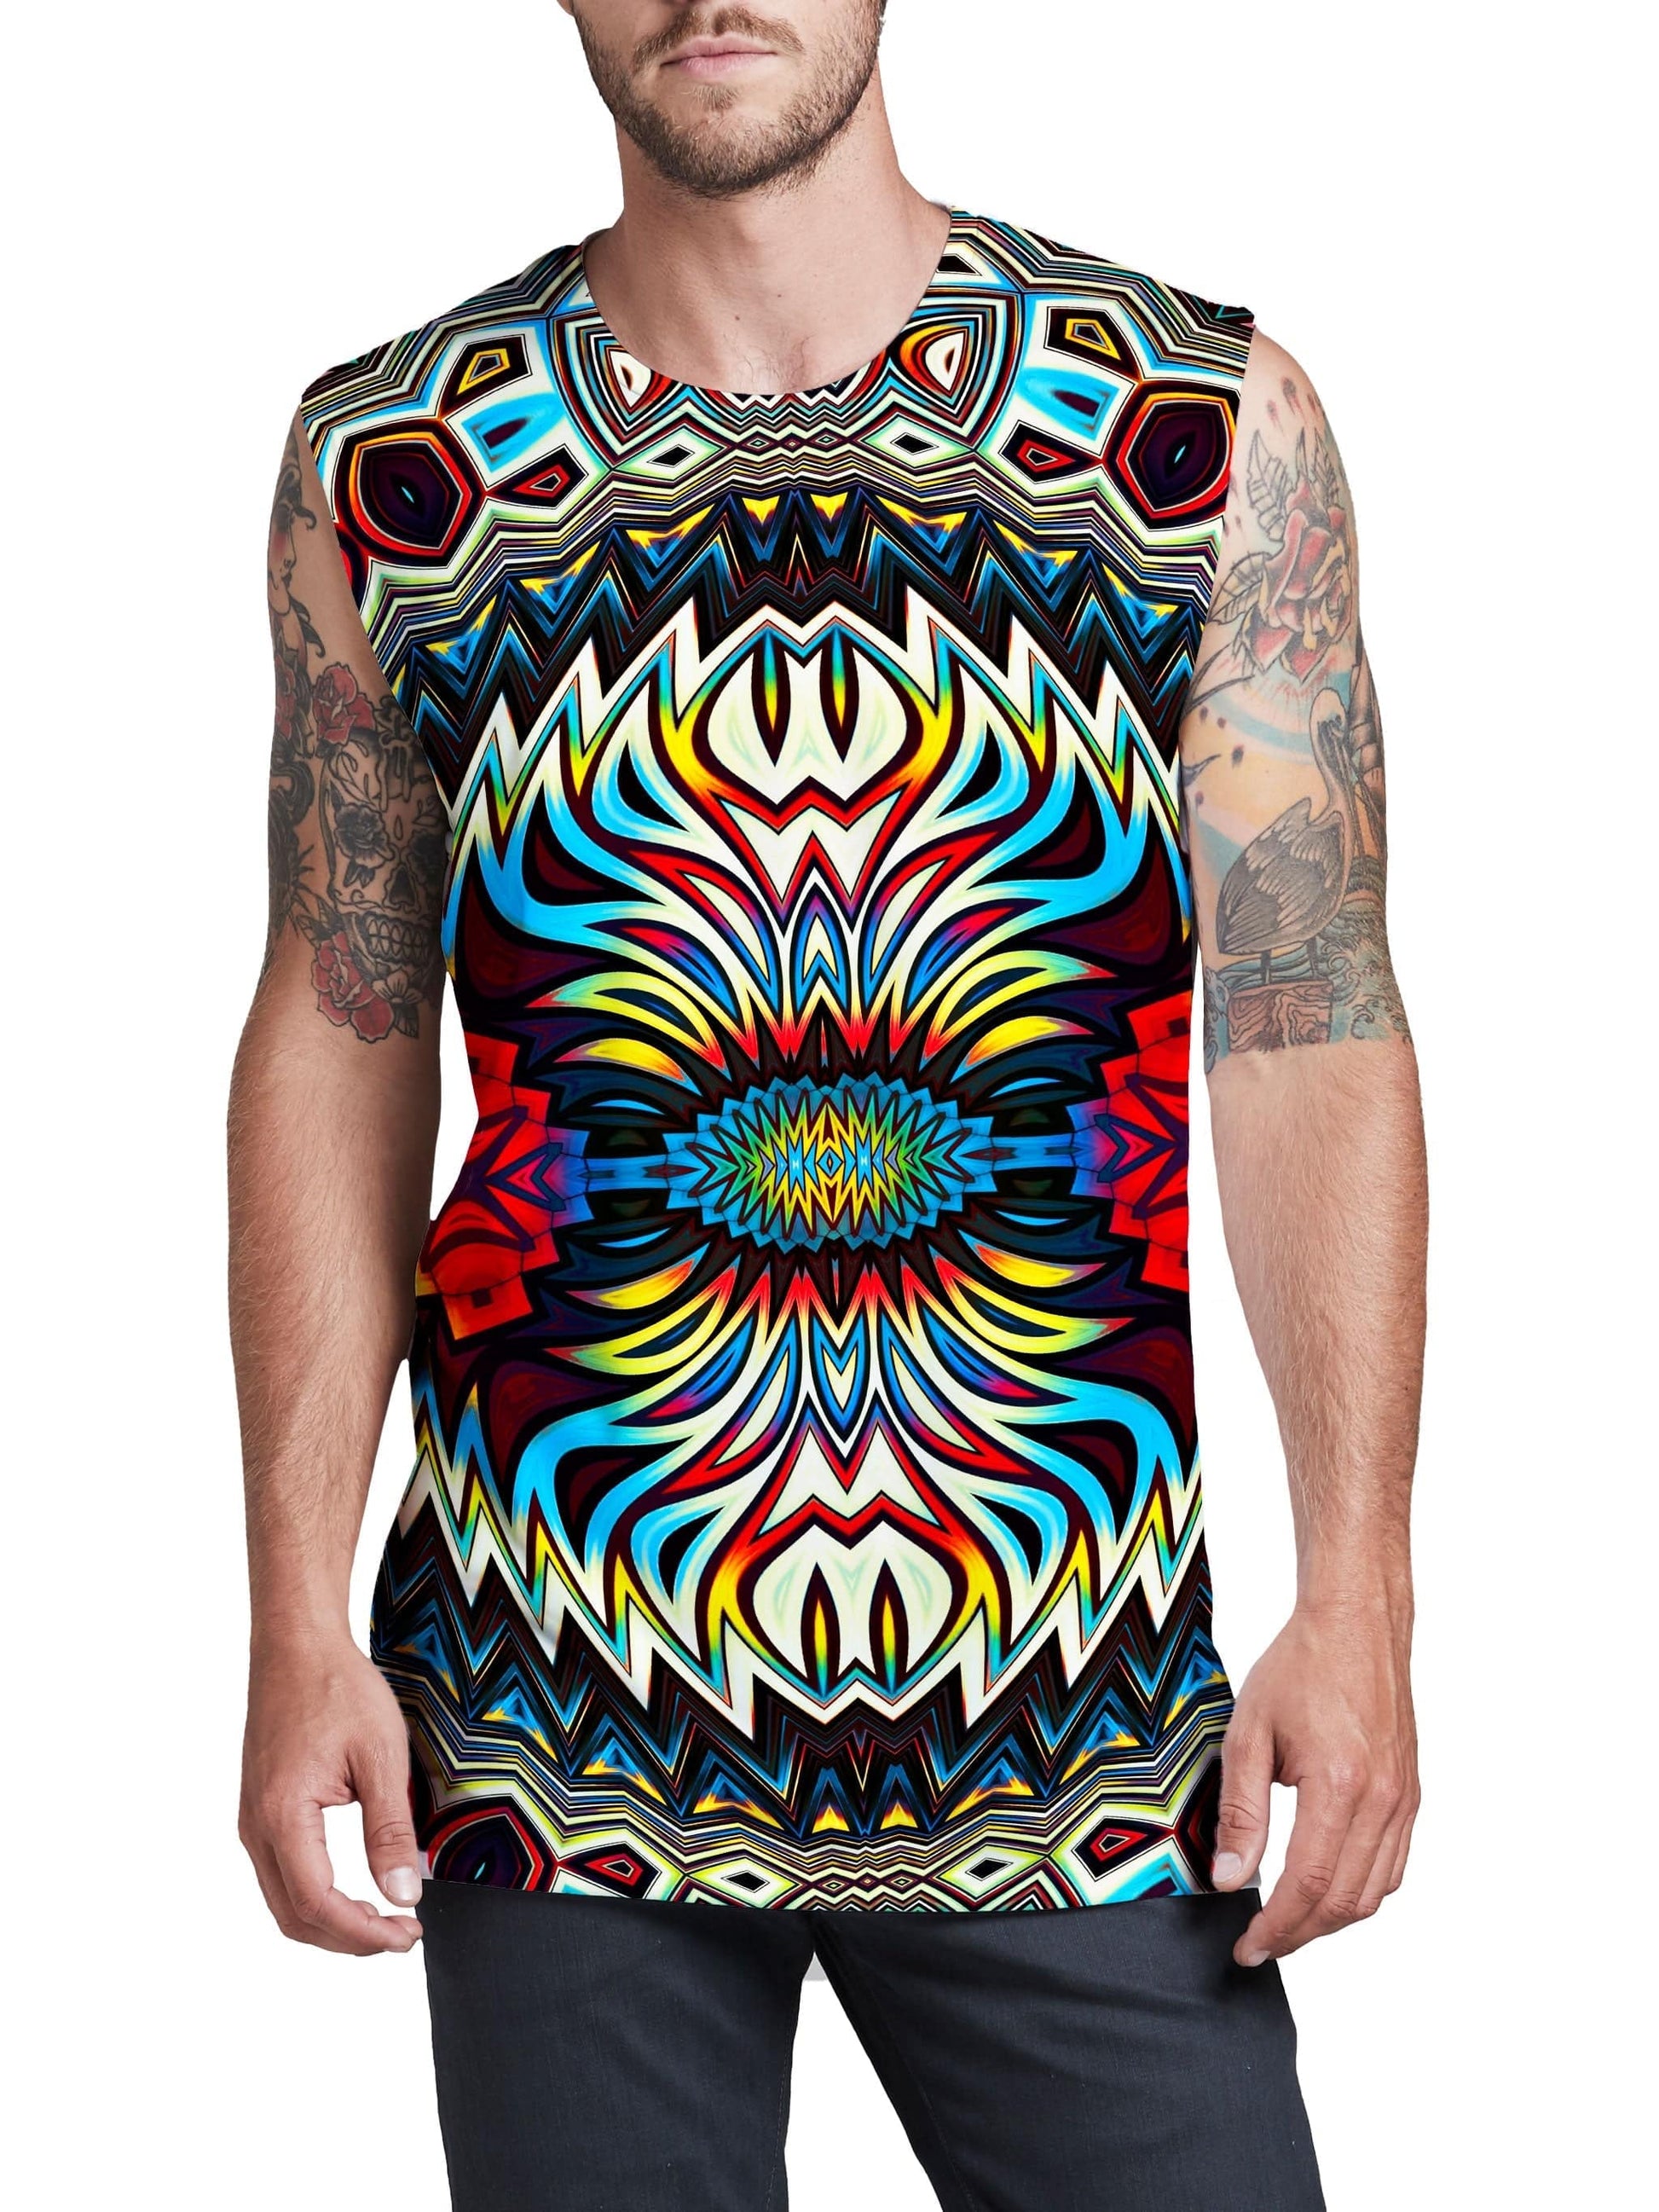 Fire for the Tribe Men's Muscle Tank, Glass Prism Studios, | iEDM